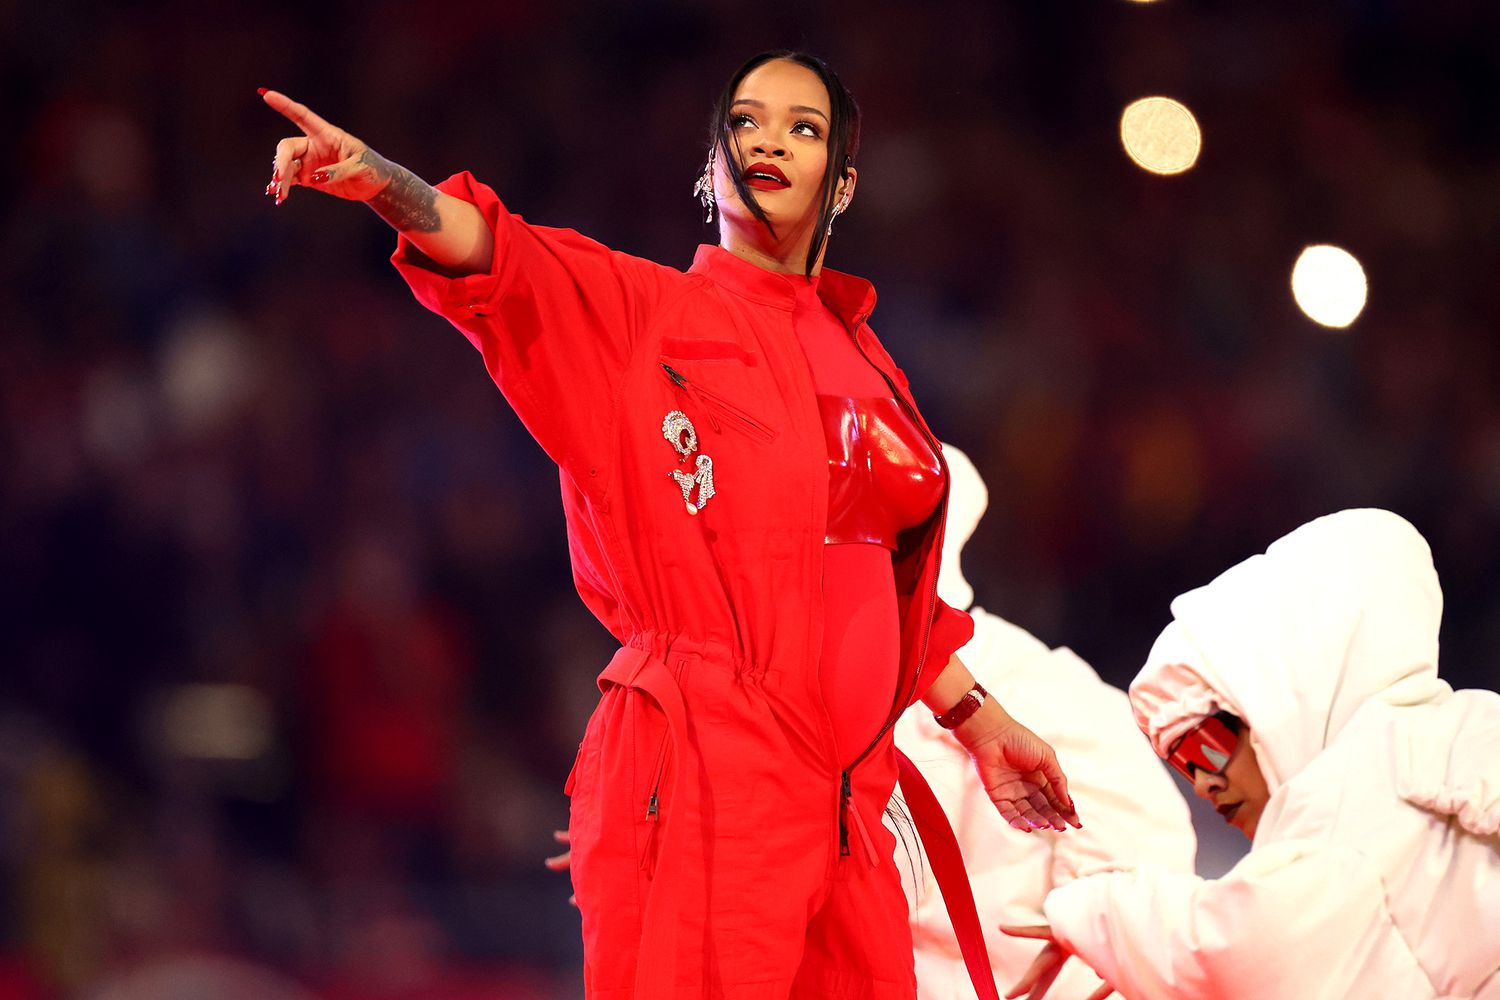 Rihanna performs onstage during the Apple Music Super Bowl LVII Halftime Show at State Farm Stadium on February 12, 2023 in Glendale, Arizona.